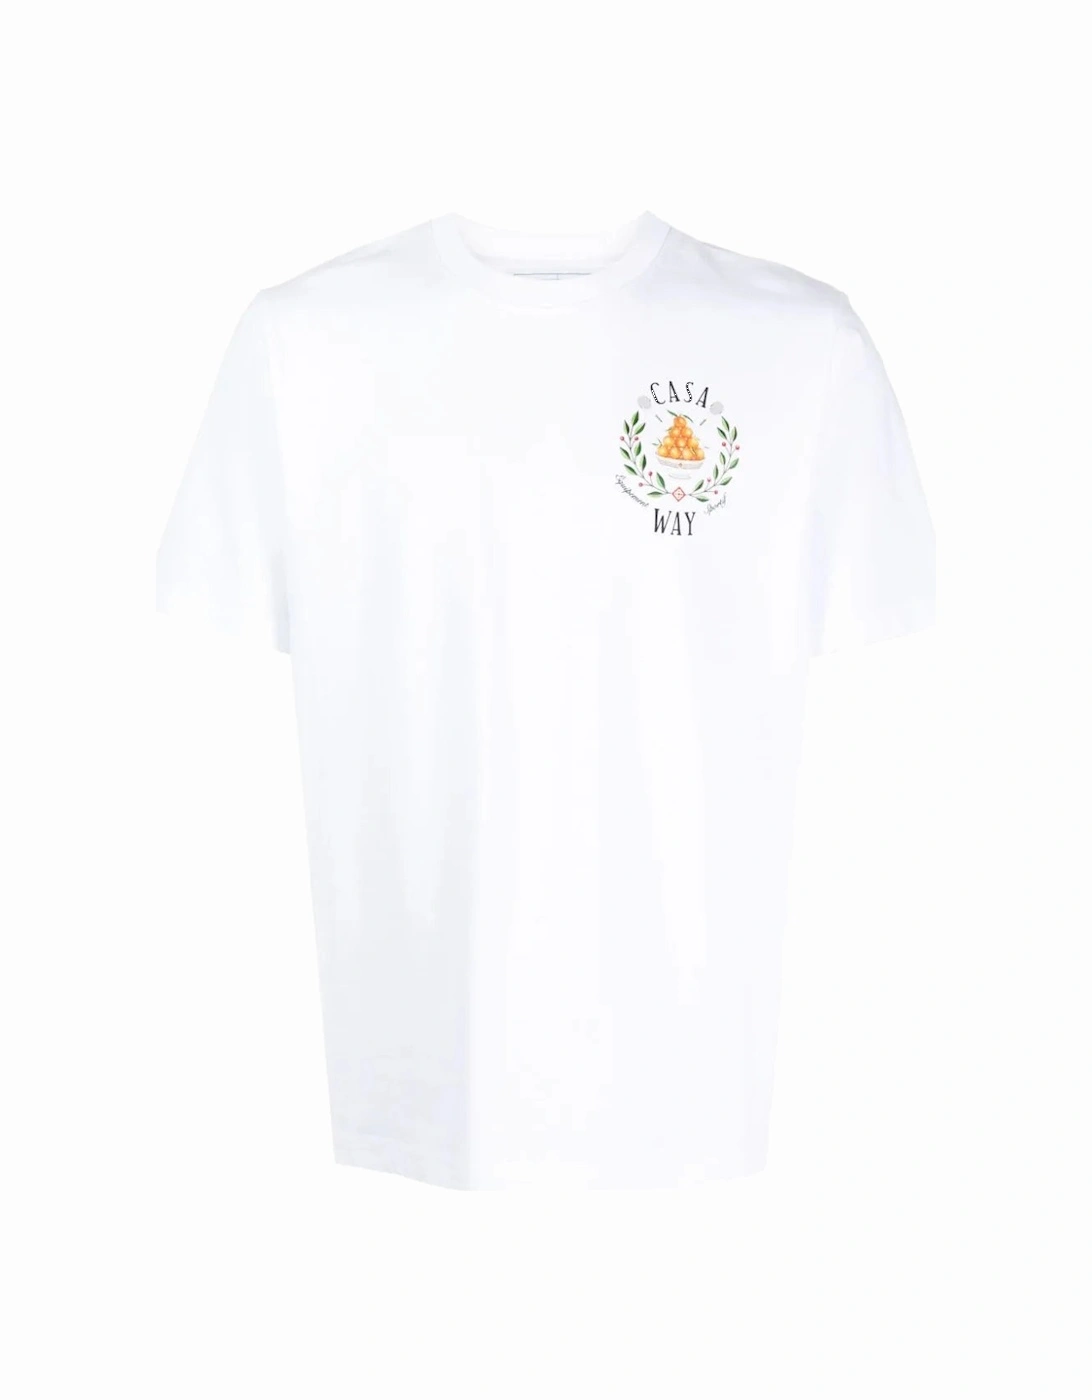 Casa Way Bowl of Oranges T-Shirt in White, 6 of 5